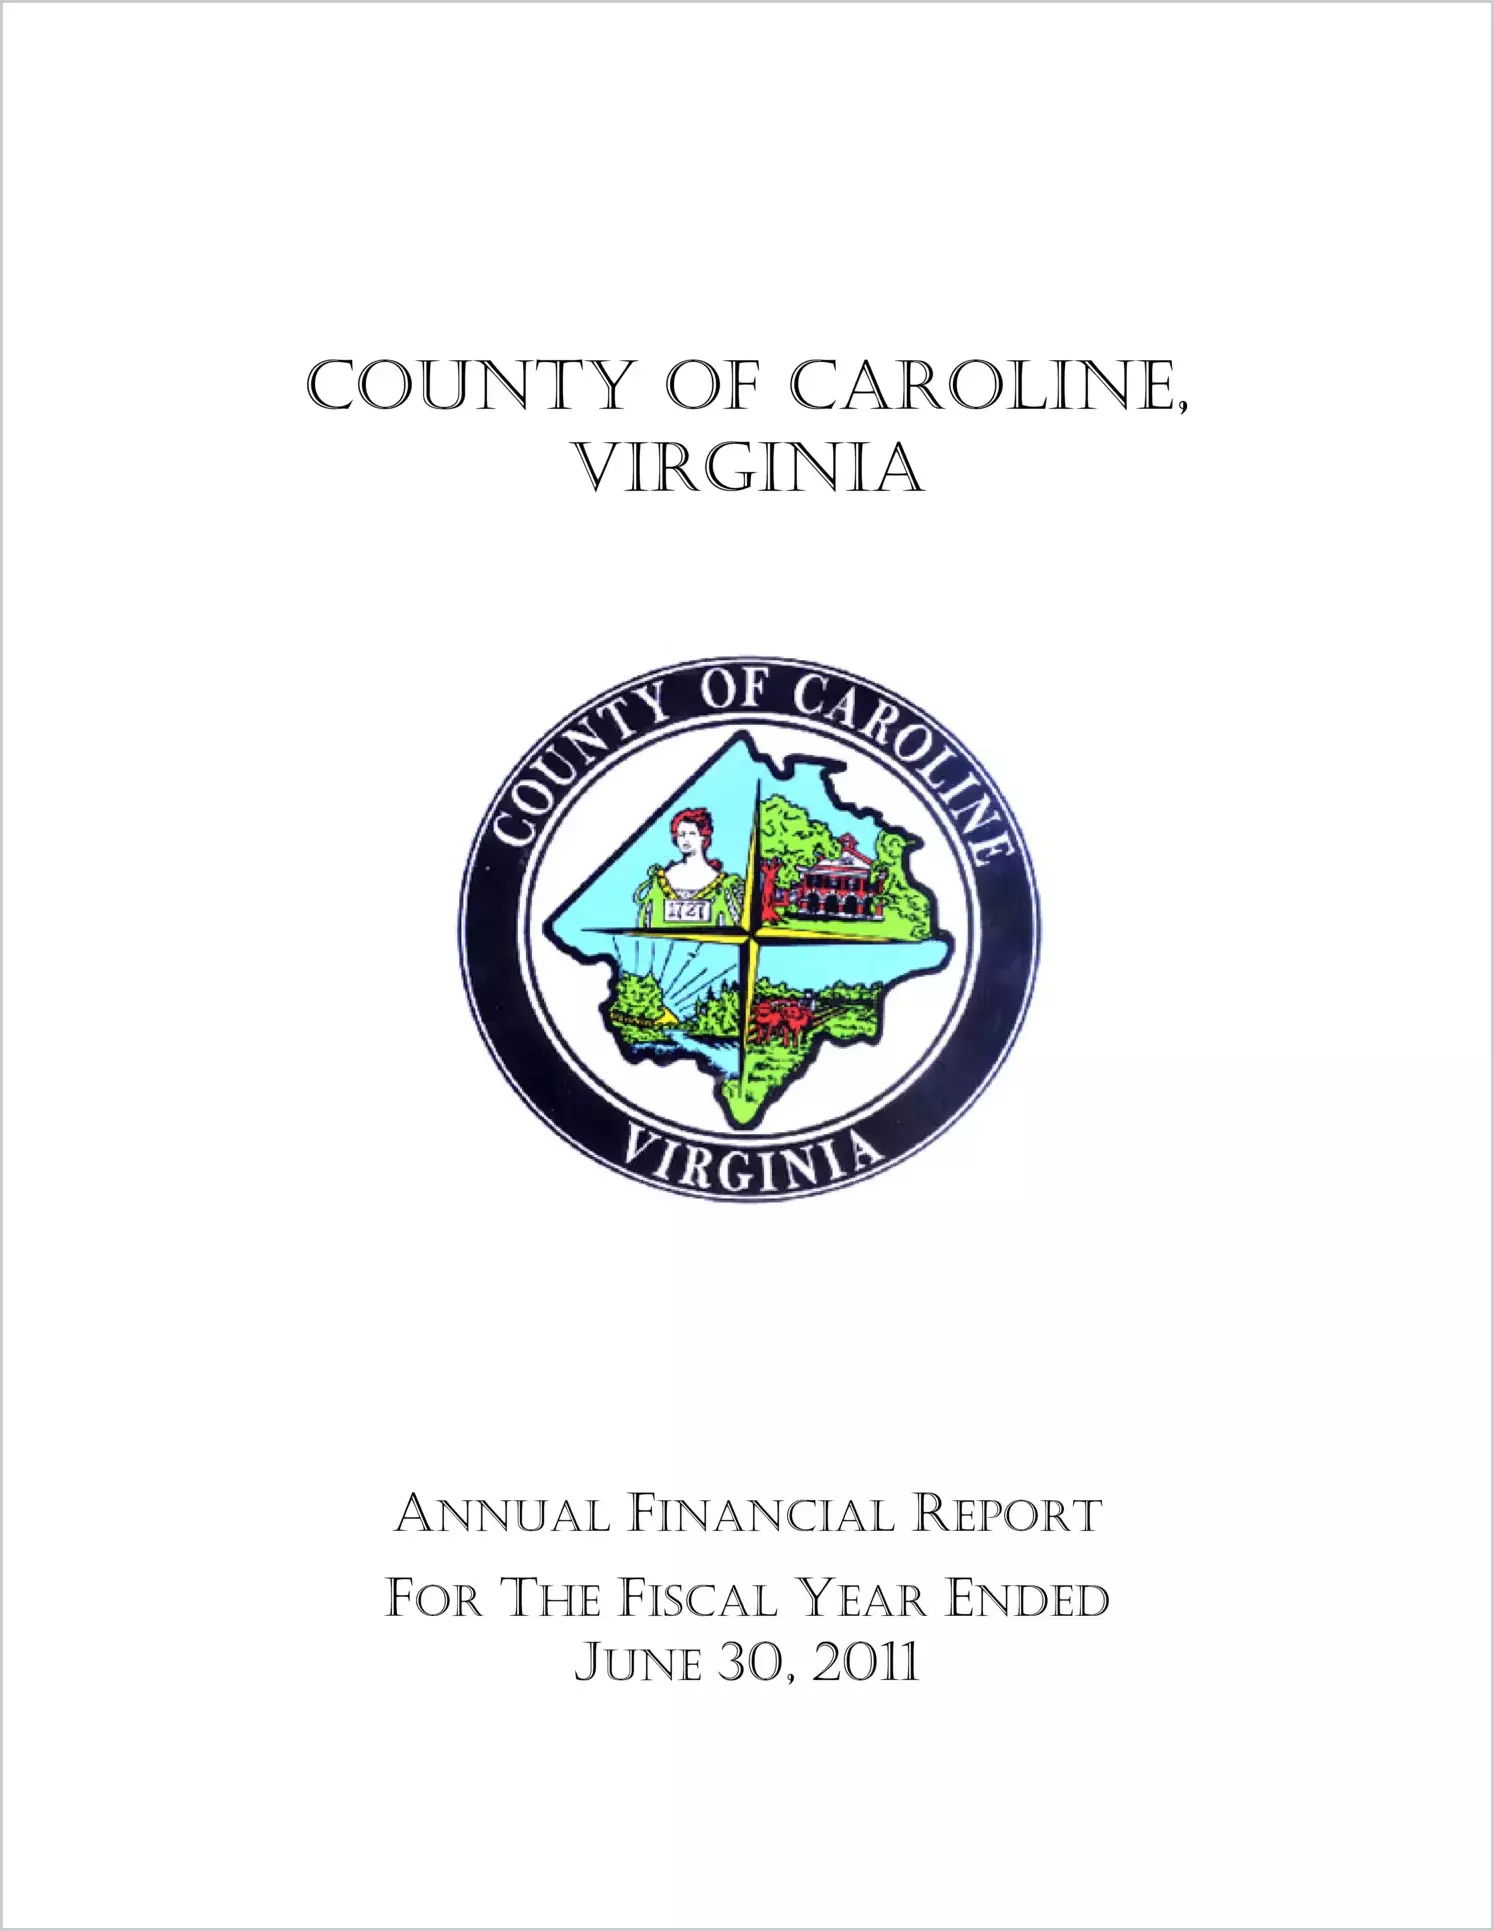 2011 Annual Financial Report for County of Caroline